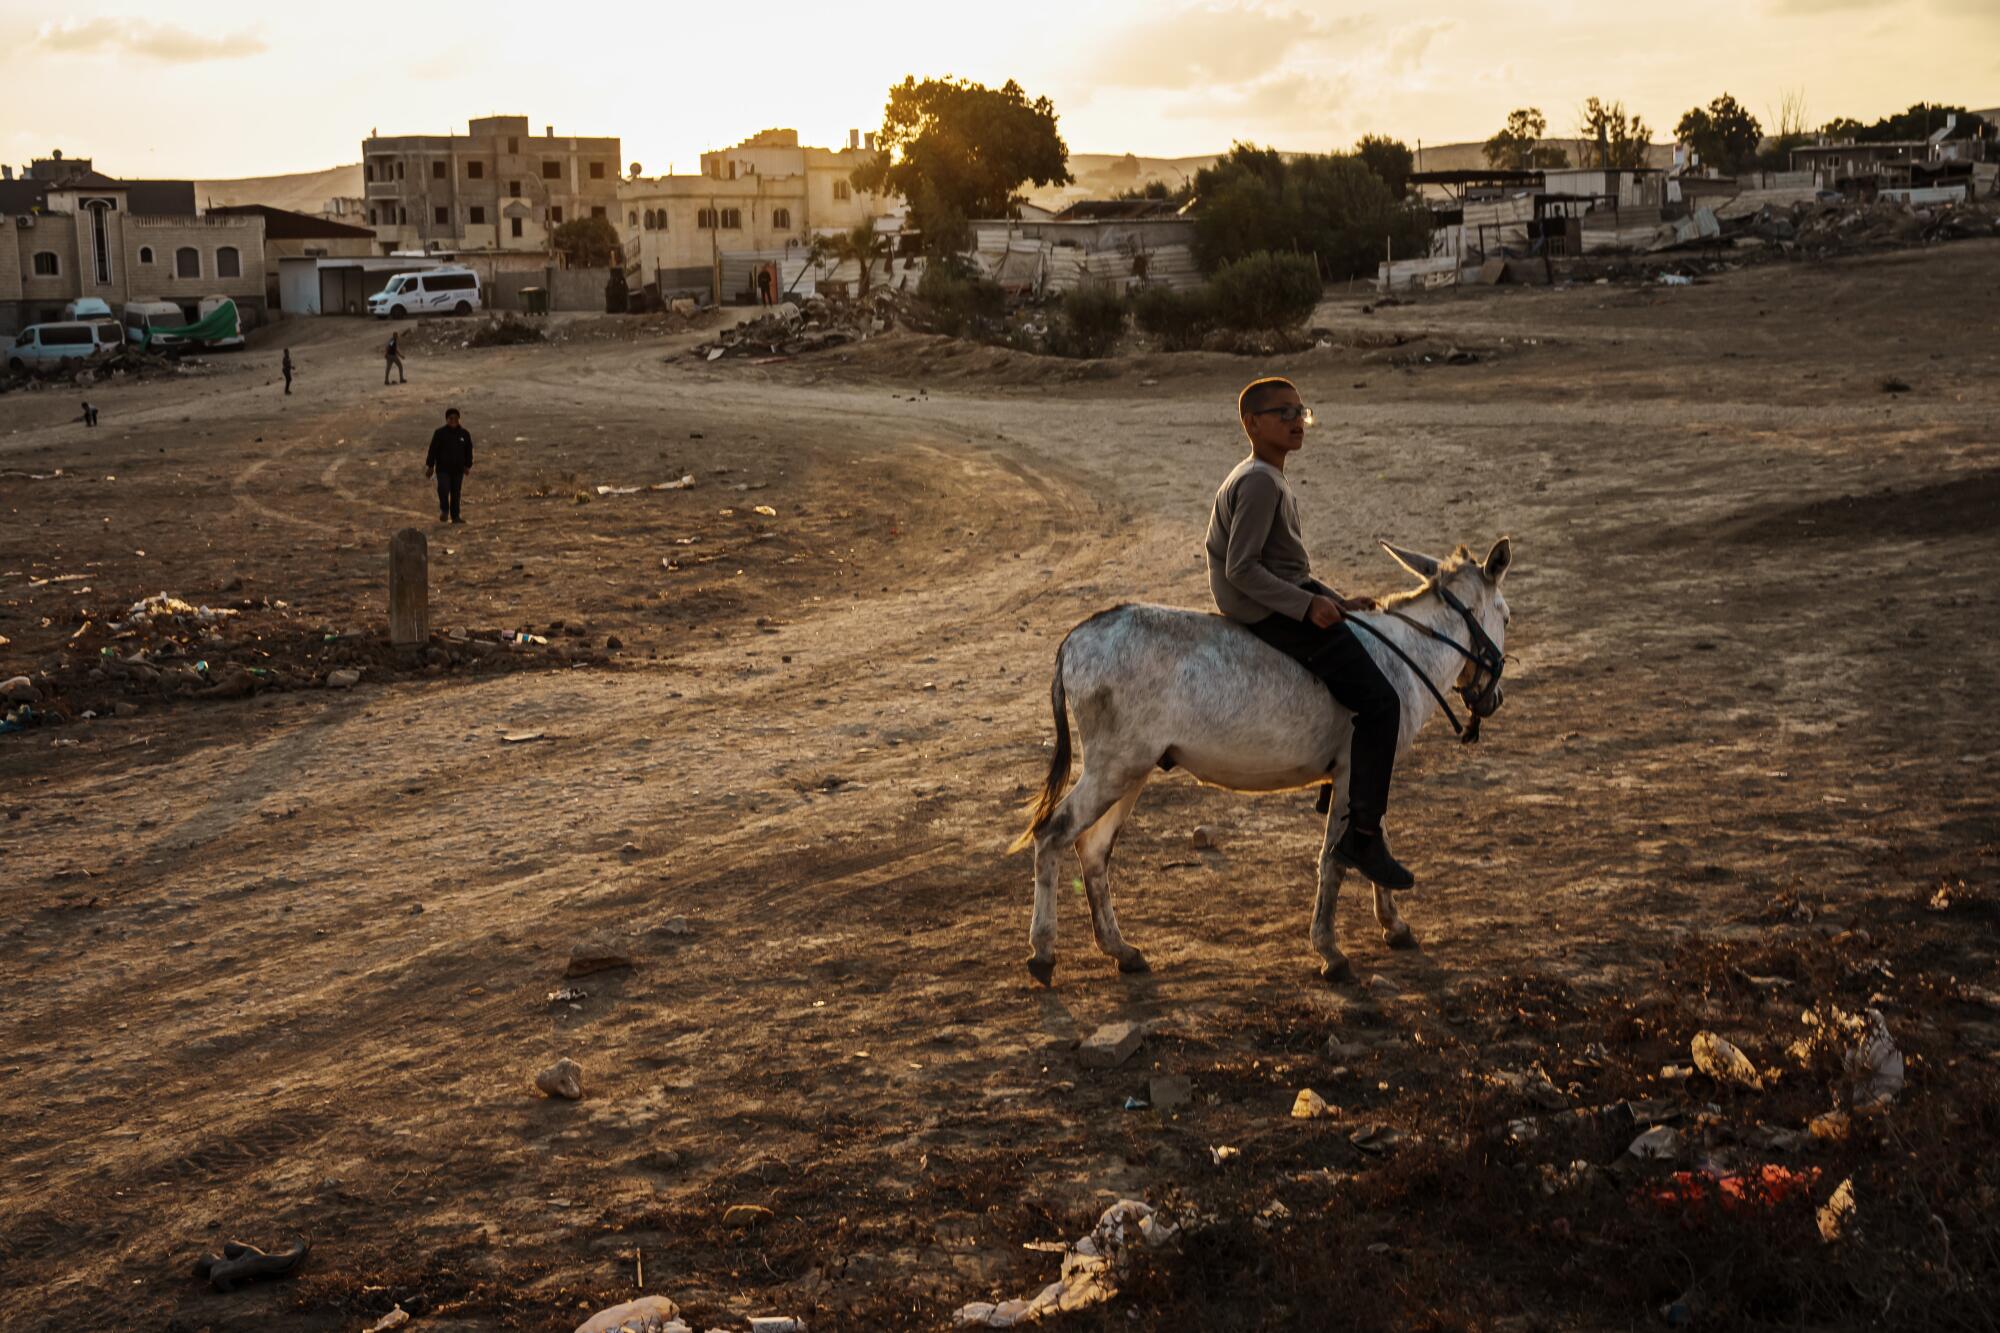 A boy rides a donkey in the desert, with a group of buildings in the background